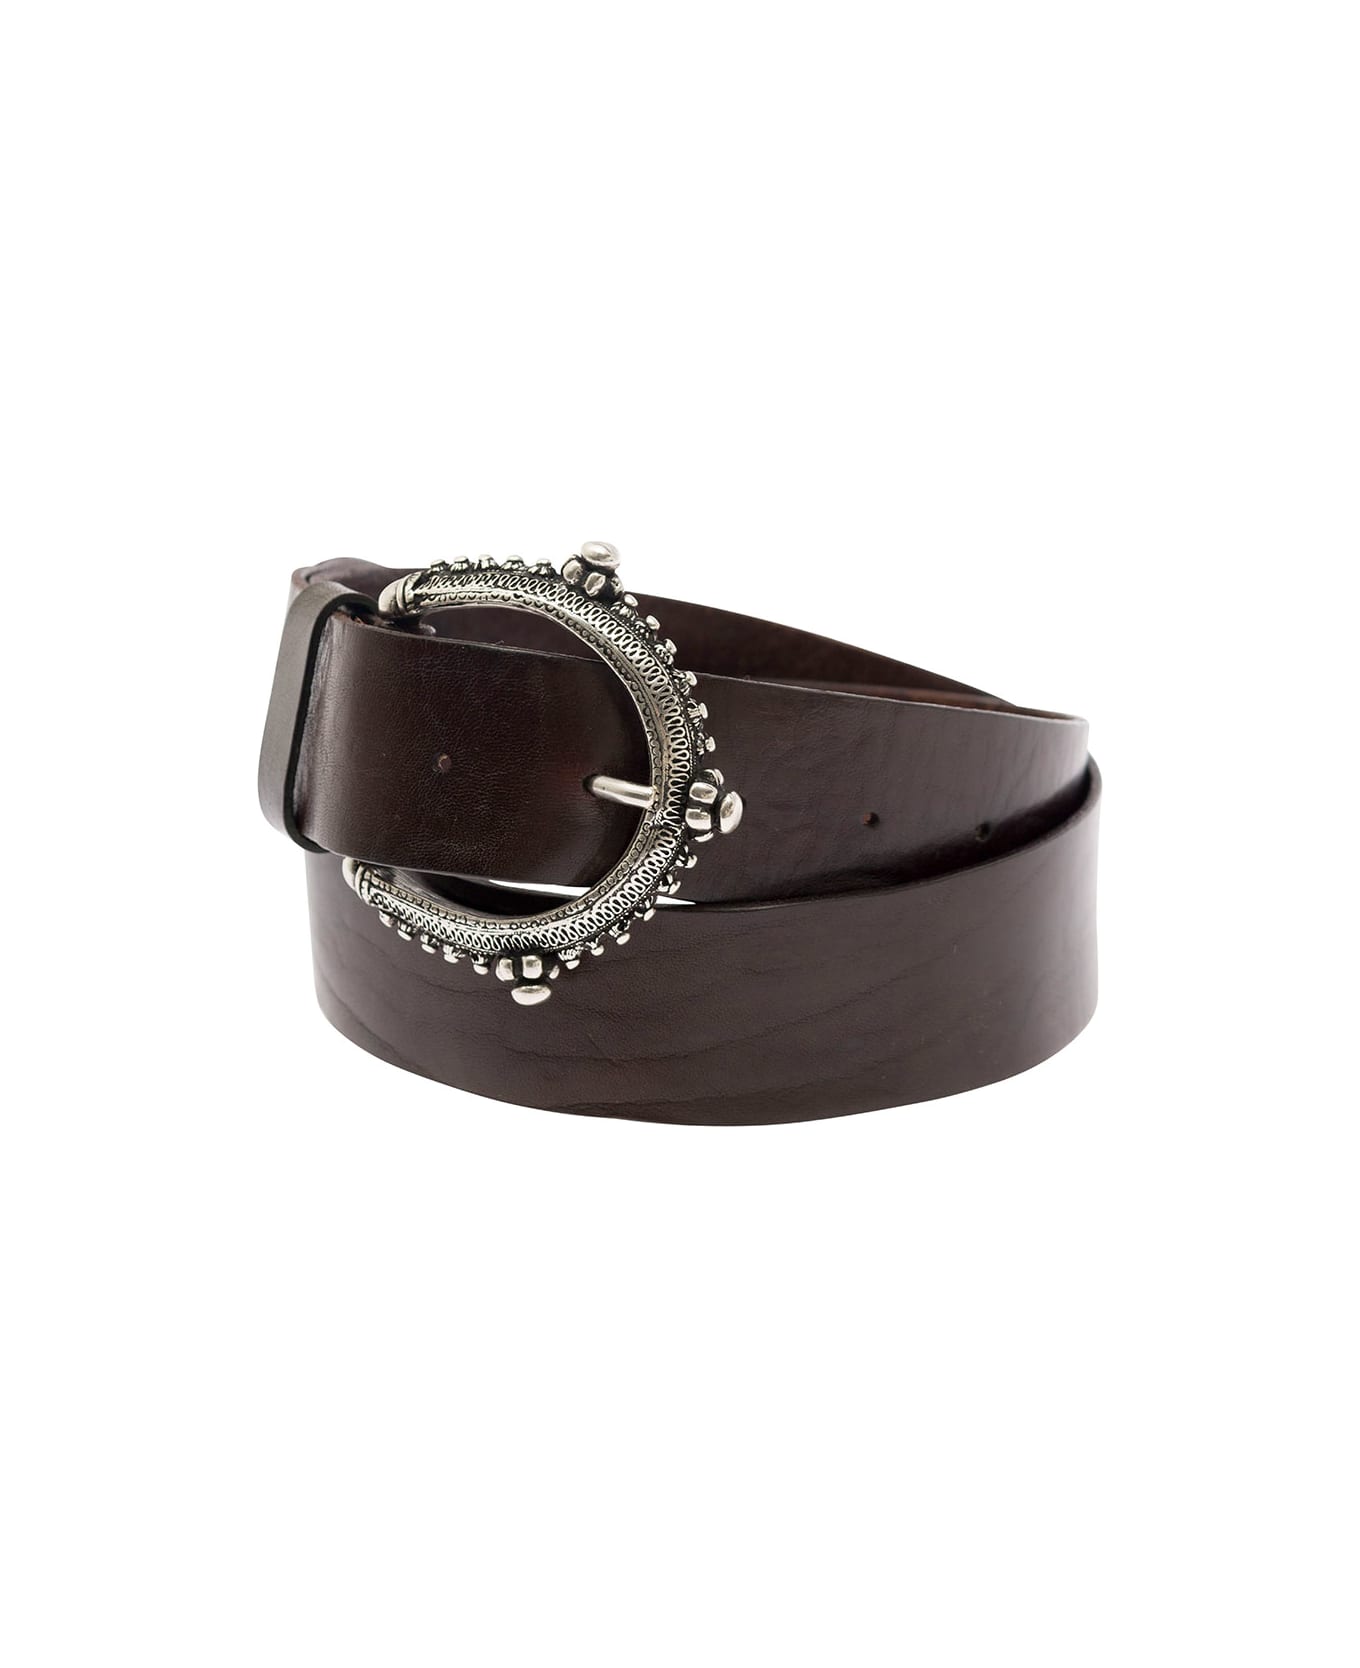 Parosh Brown Belt With Circle Buckle In Leather Woman - Brown アクセサリー